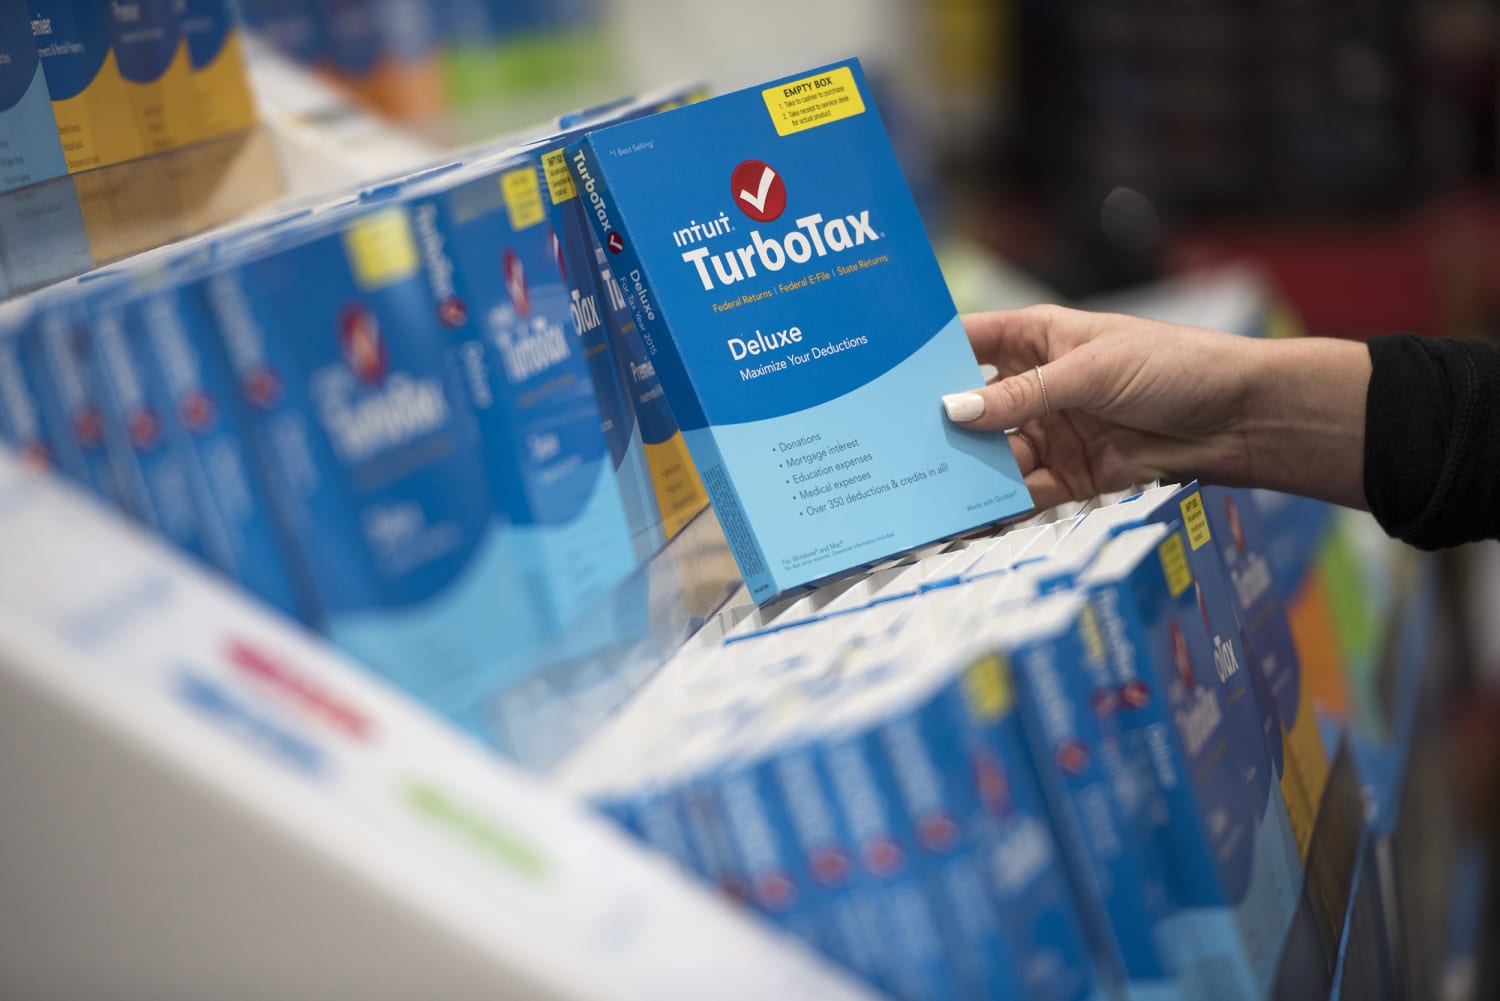 turbotax deluxe 2015 download for mac